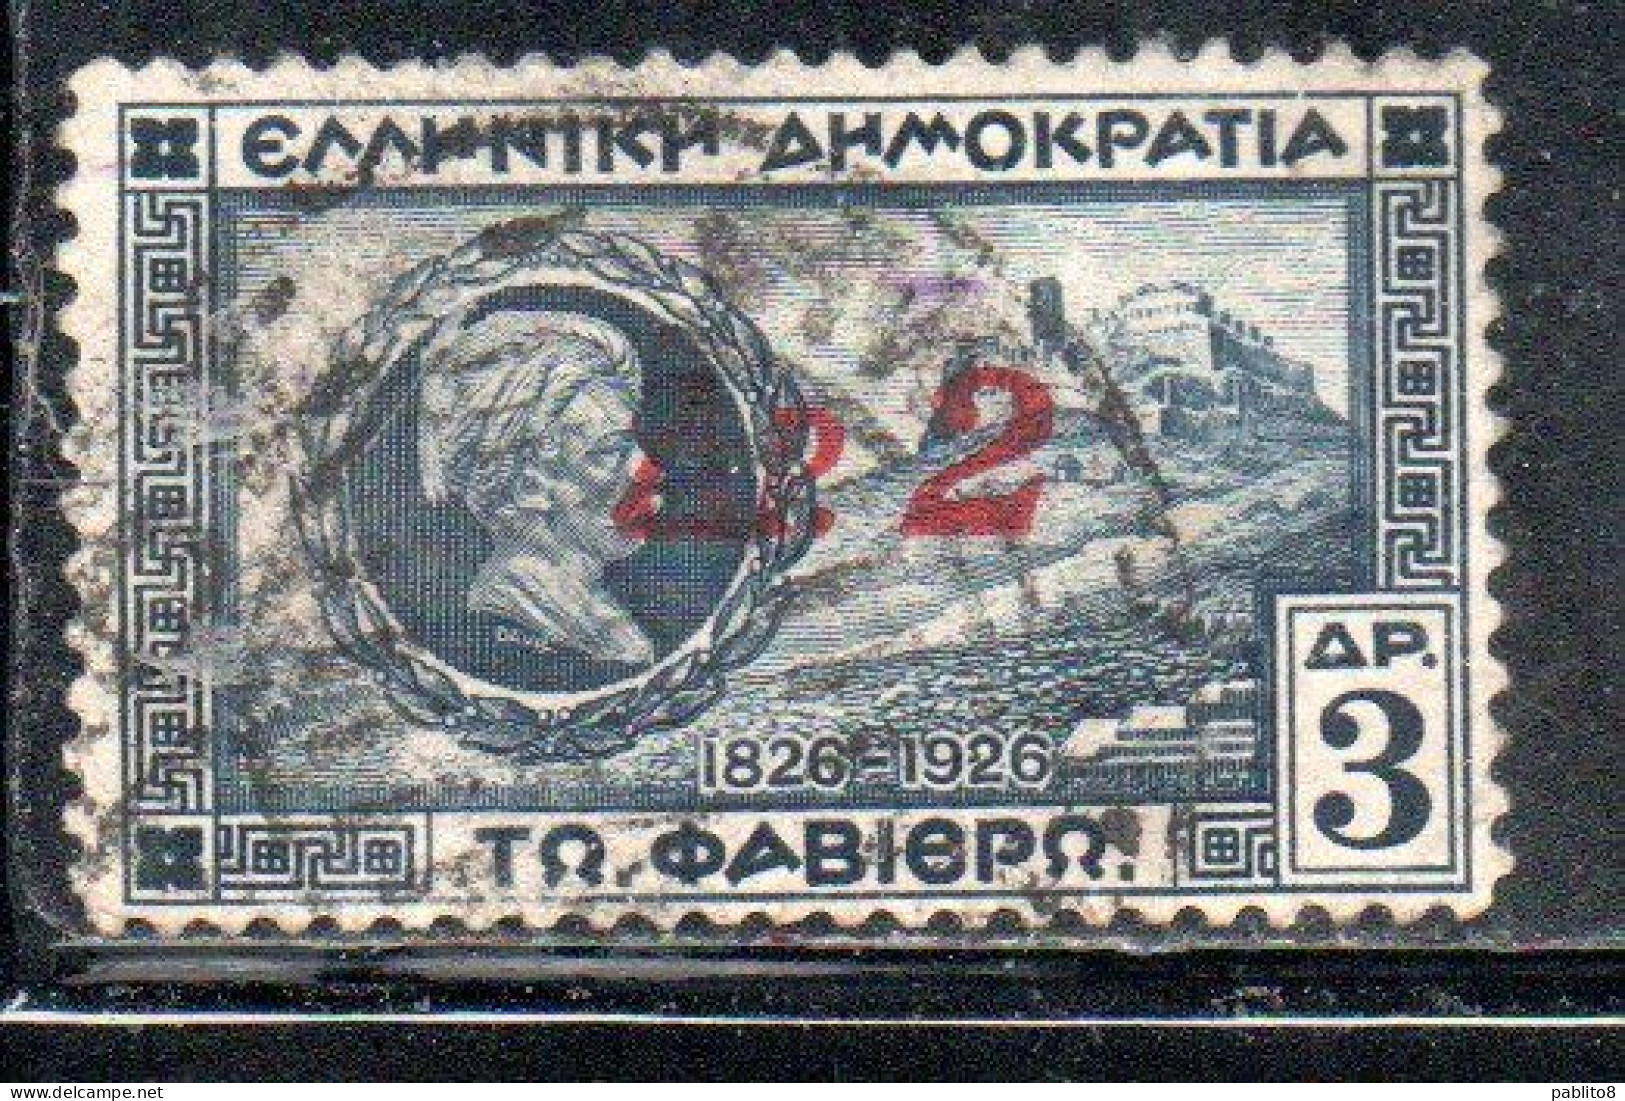 GREECE GRECIA HELLAS 1932 SURCHARGED GENERAL CHARLES FABVIER AND ACROPOLIS 2d On 3d USED USATO OBLITERE' - Oblitérés